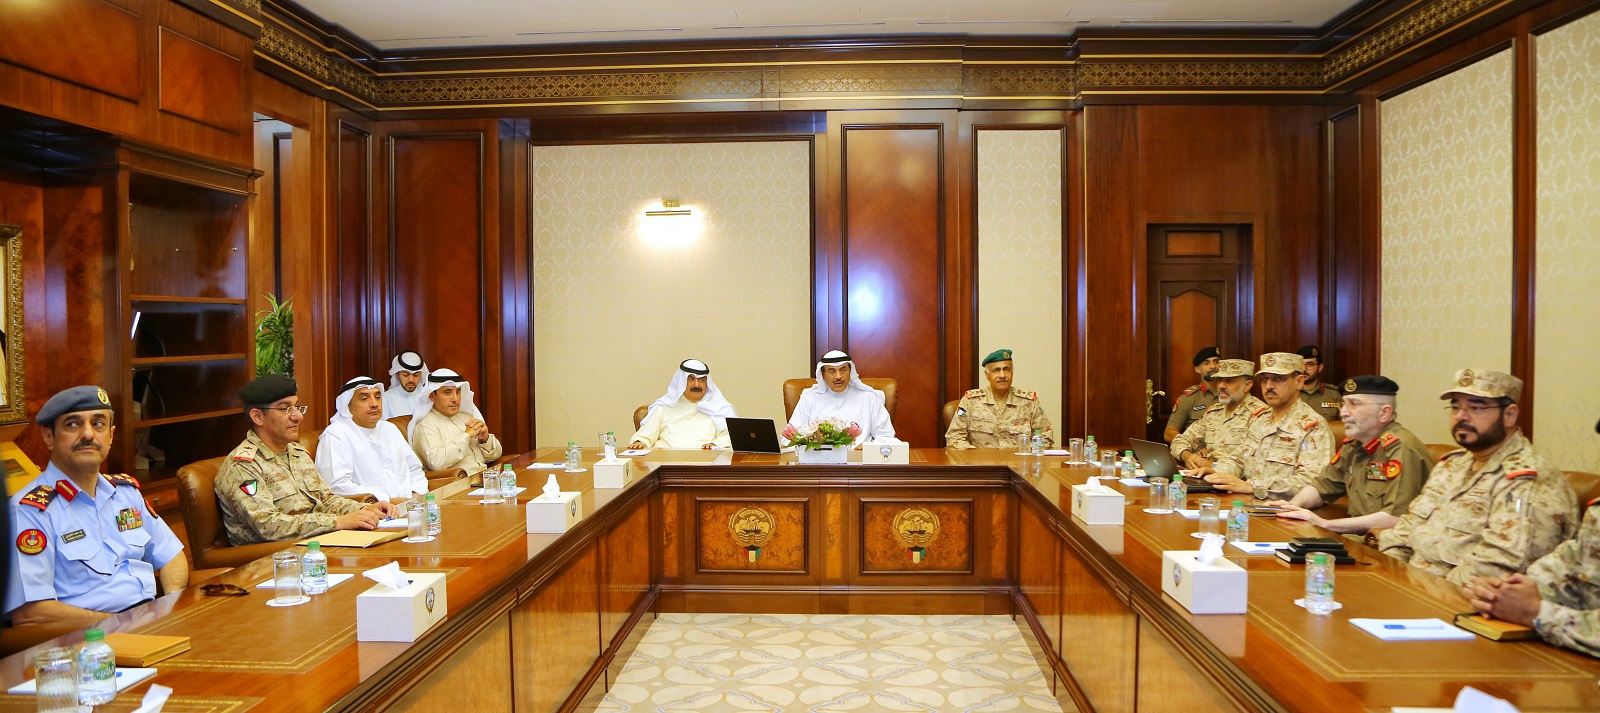 Kuwait Acting Defense Min meets with officials